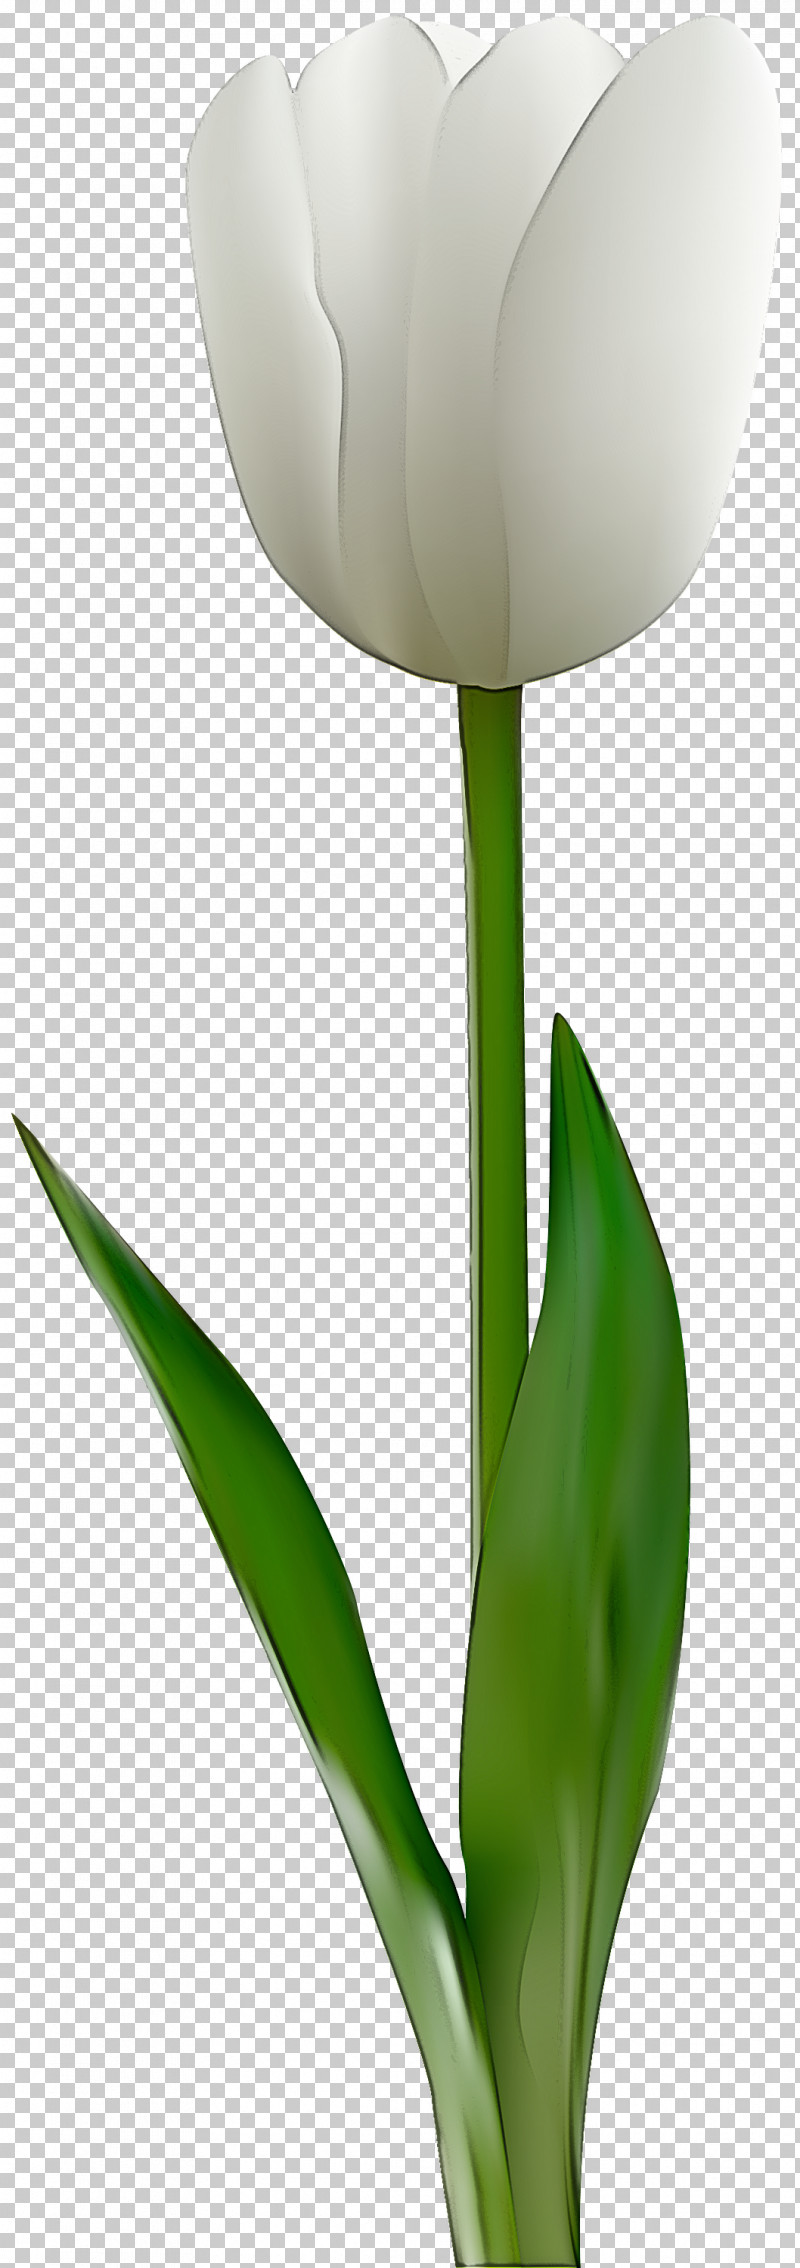 Flower Green Tulip Plant Leaf PNG, Clipart, Flower, Green, Leaf, Lily Family, Petal Free PNG Download